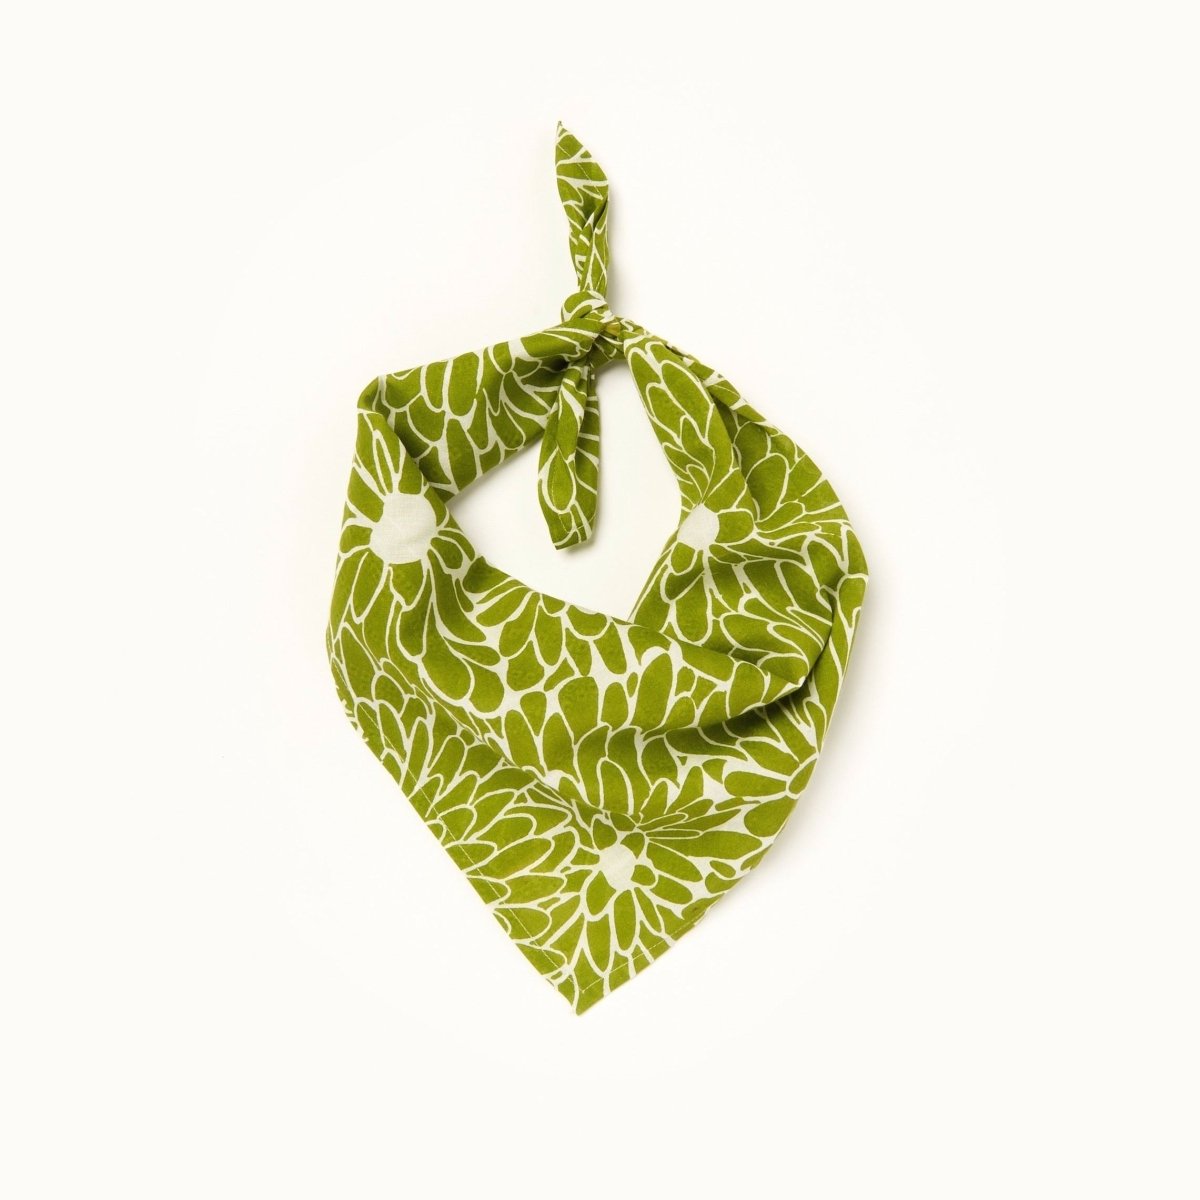 A green and white patterned bandana, folded over and tied in a knot. Block printed by hand, the Coco Bandana from Maelu is designed in Portland, Oregon and handmade in India.